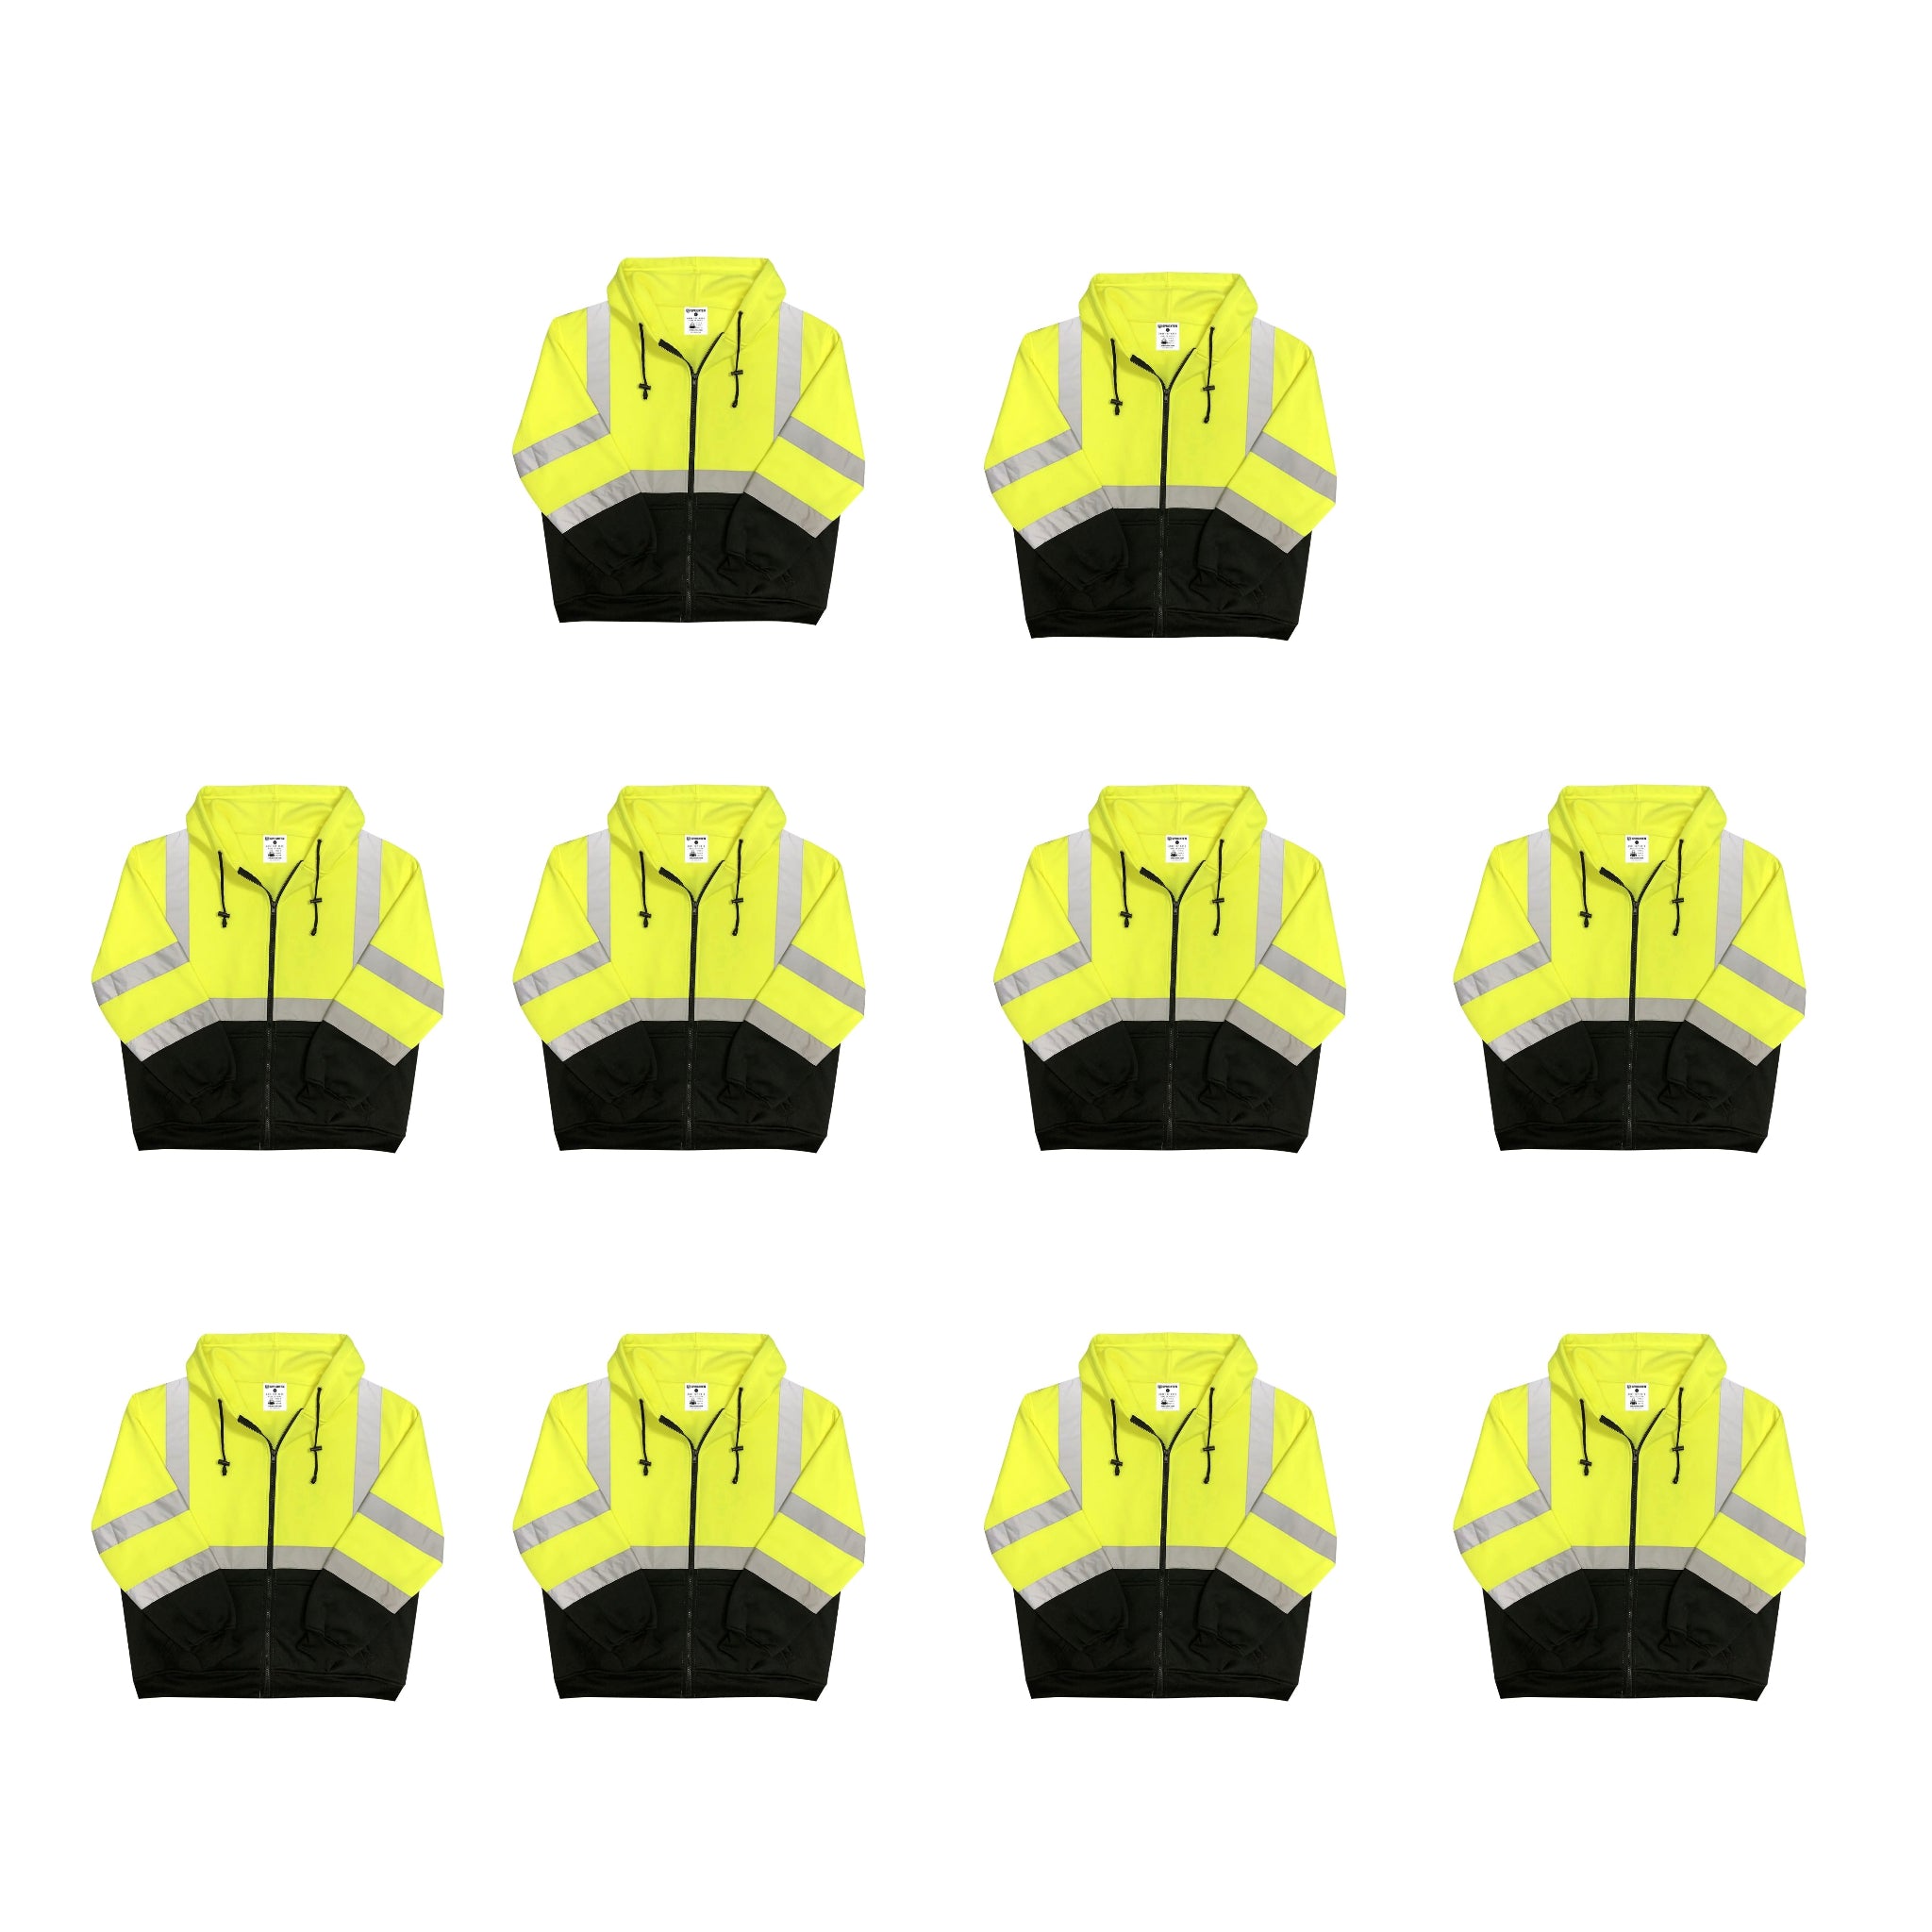 Safety Main 05LWJYB Lightweight Jacket, Class 3, Hi-Vis Yellow with Black Bottom, Pack of 10